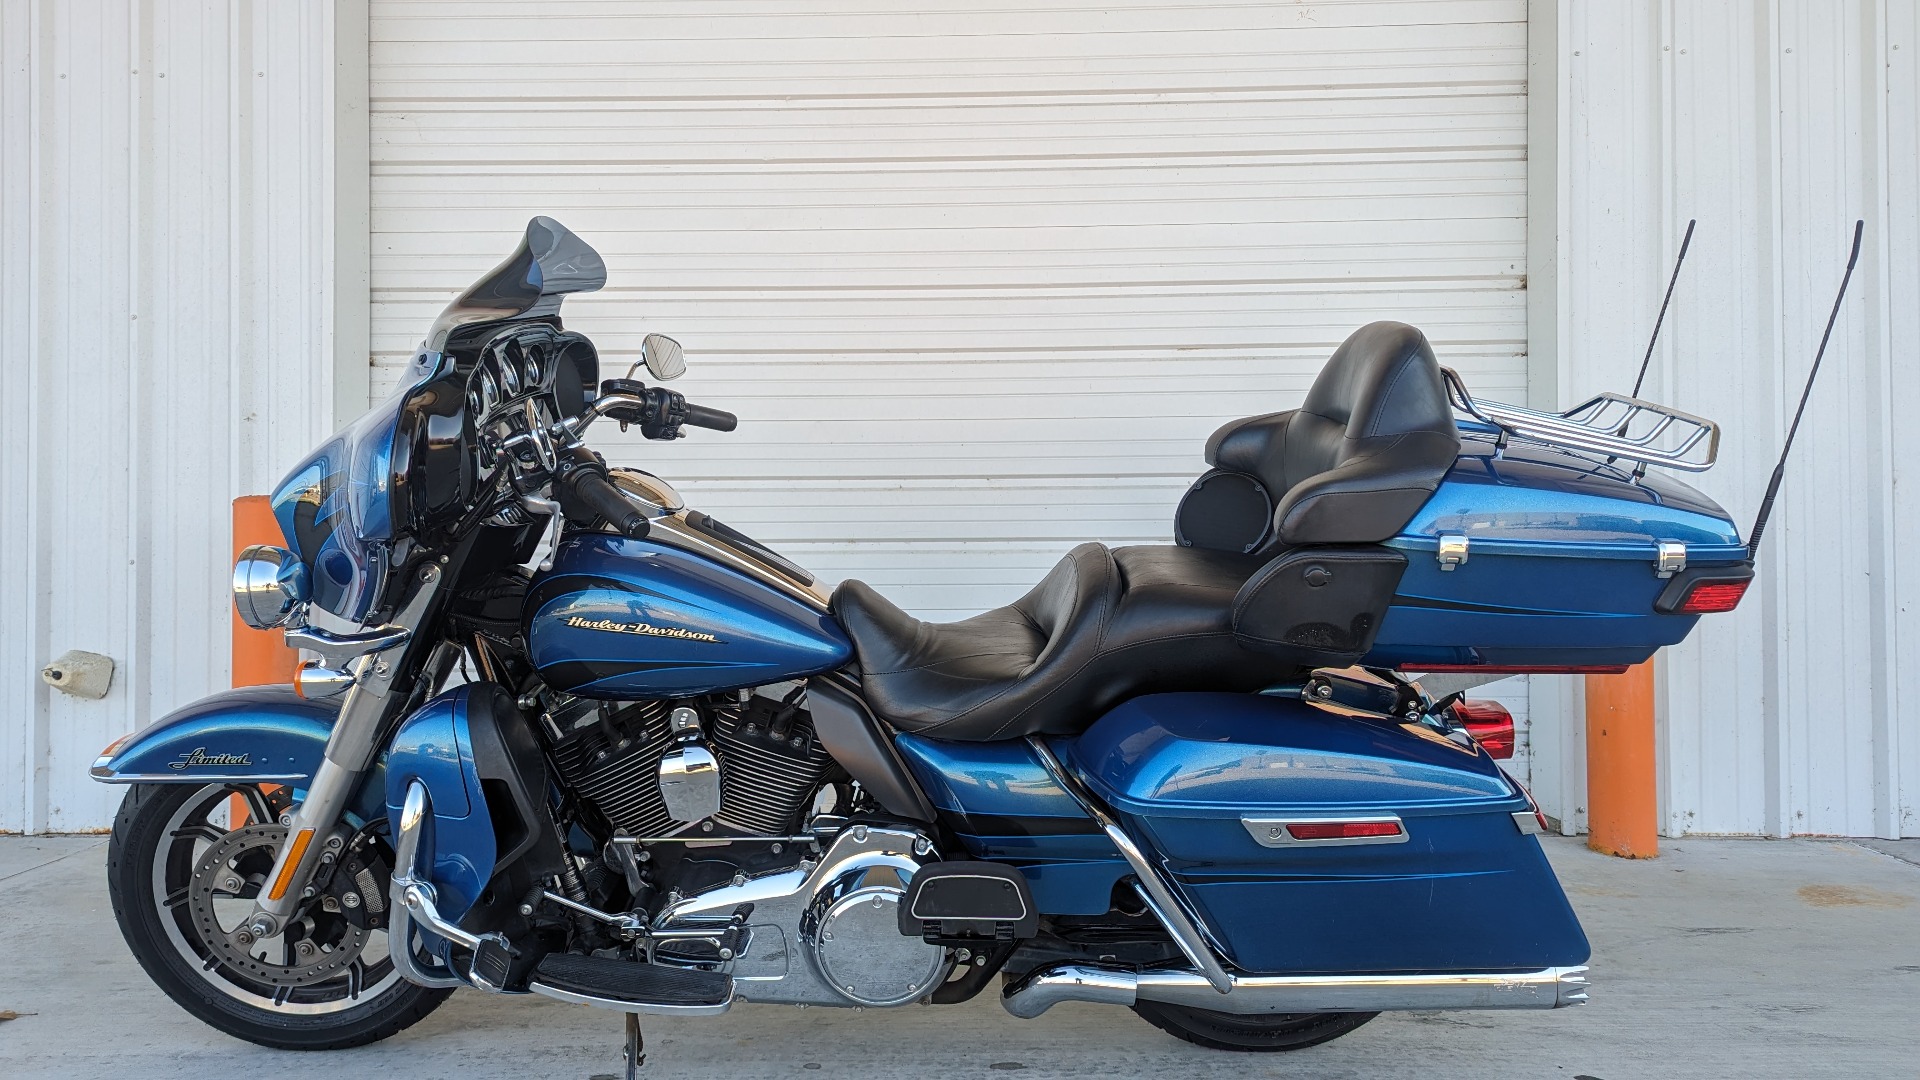 2014 harley davidson ultra limited for sale in louisiana - Photo 2